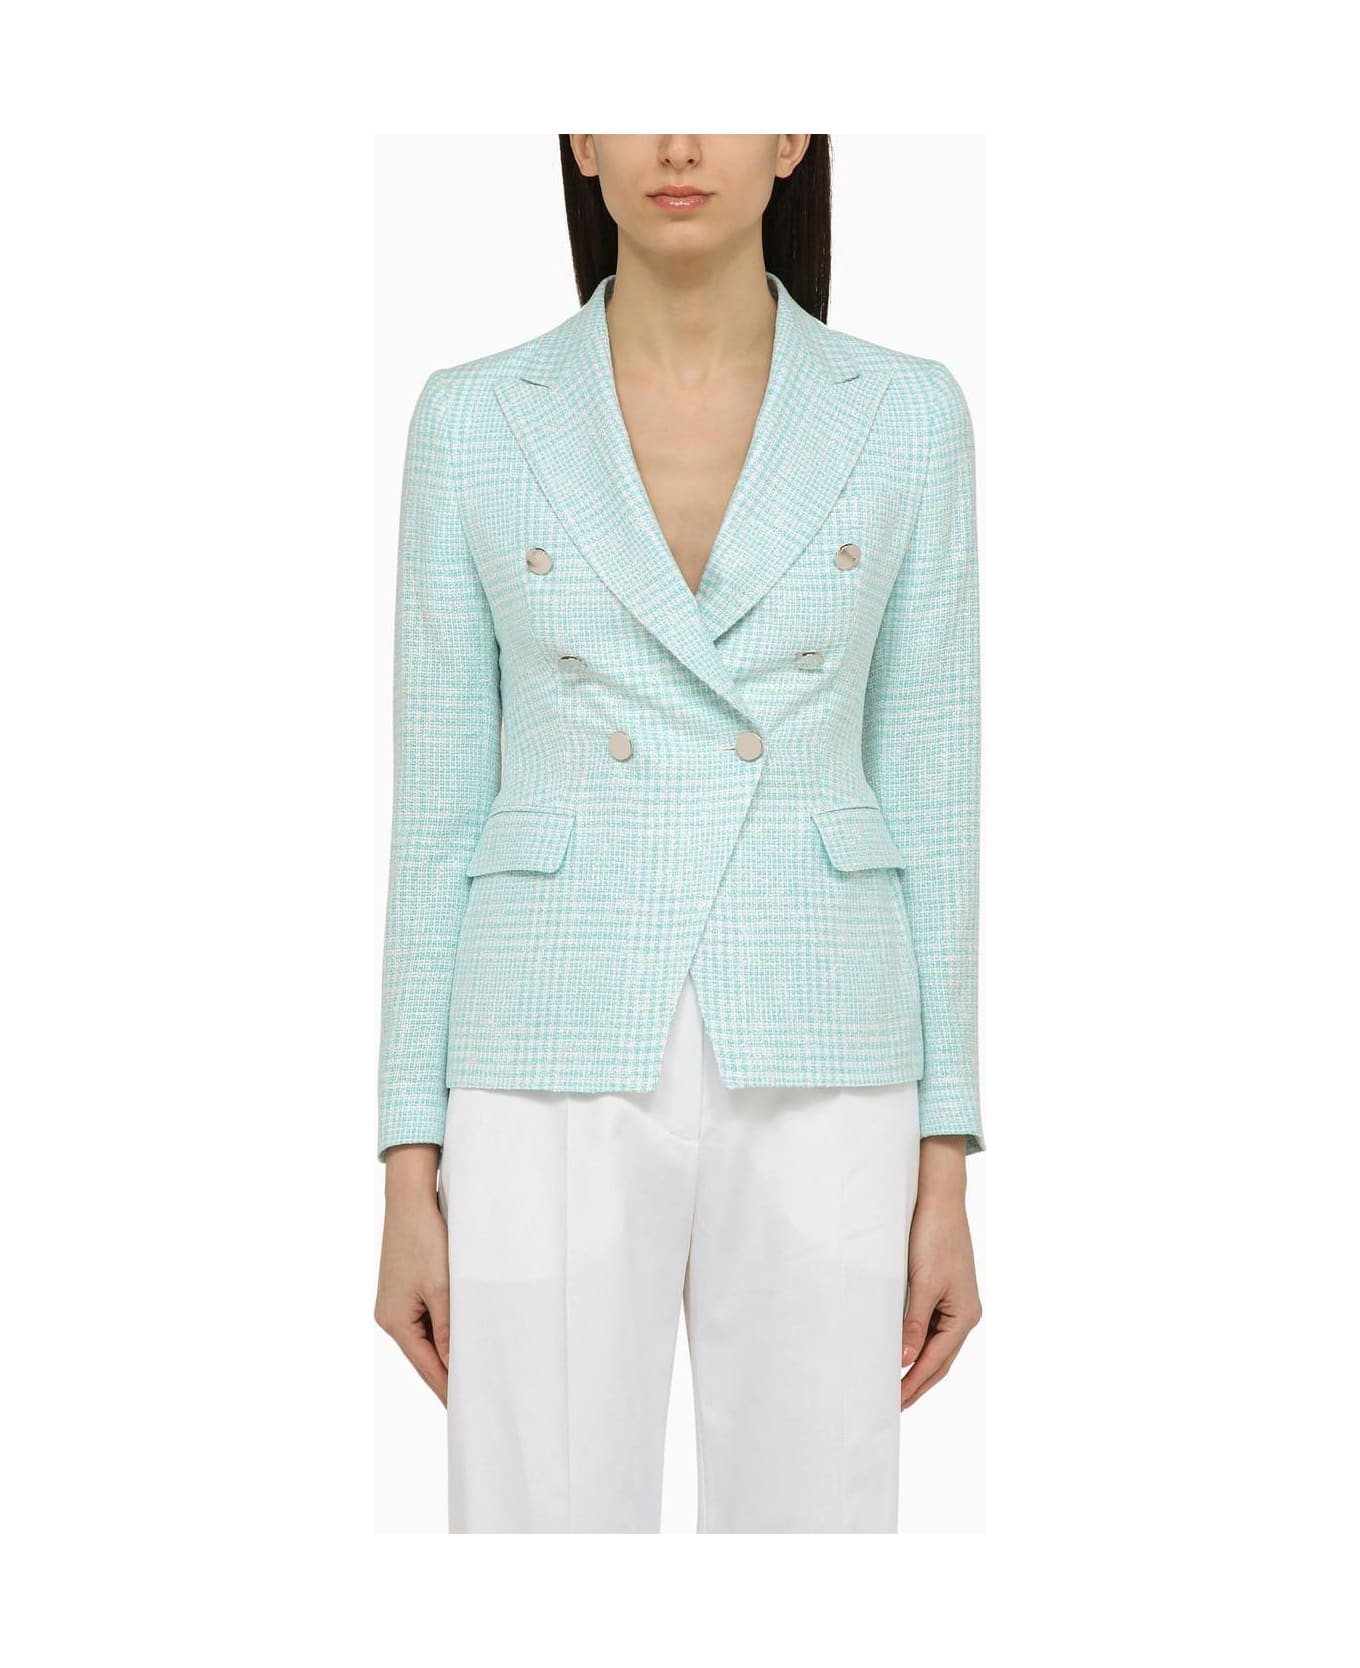 Tagliatore Light Blue Double-breasted Jacket